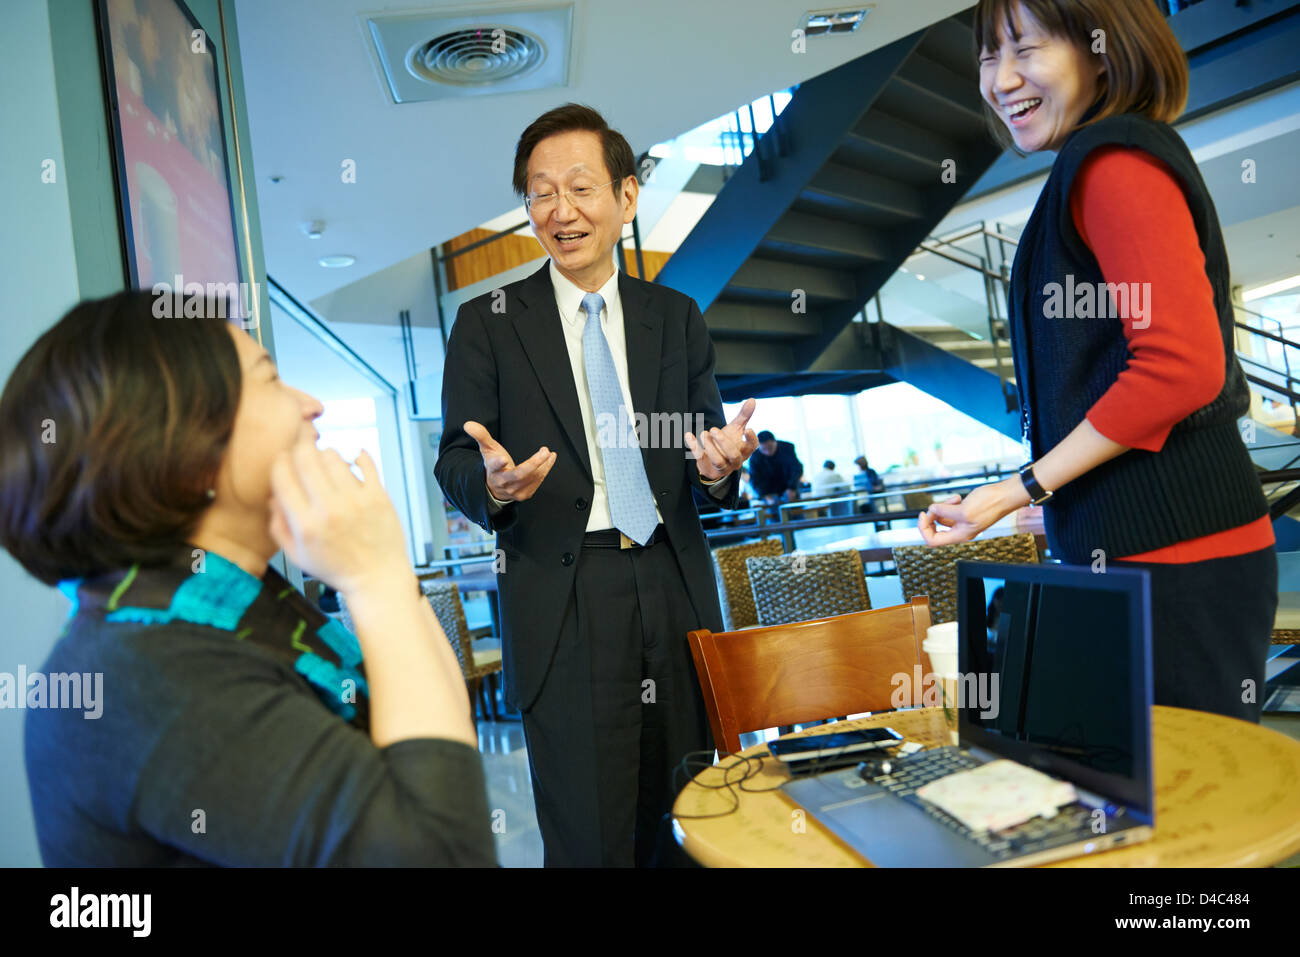 Jonney Shih, Chairman of ASUS, interacts with coworkers at Starbucks on campus of the ASUS Headquarters in Taiwan. Stock Photo